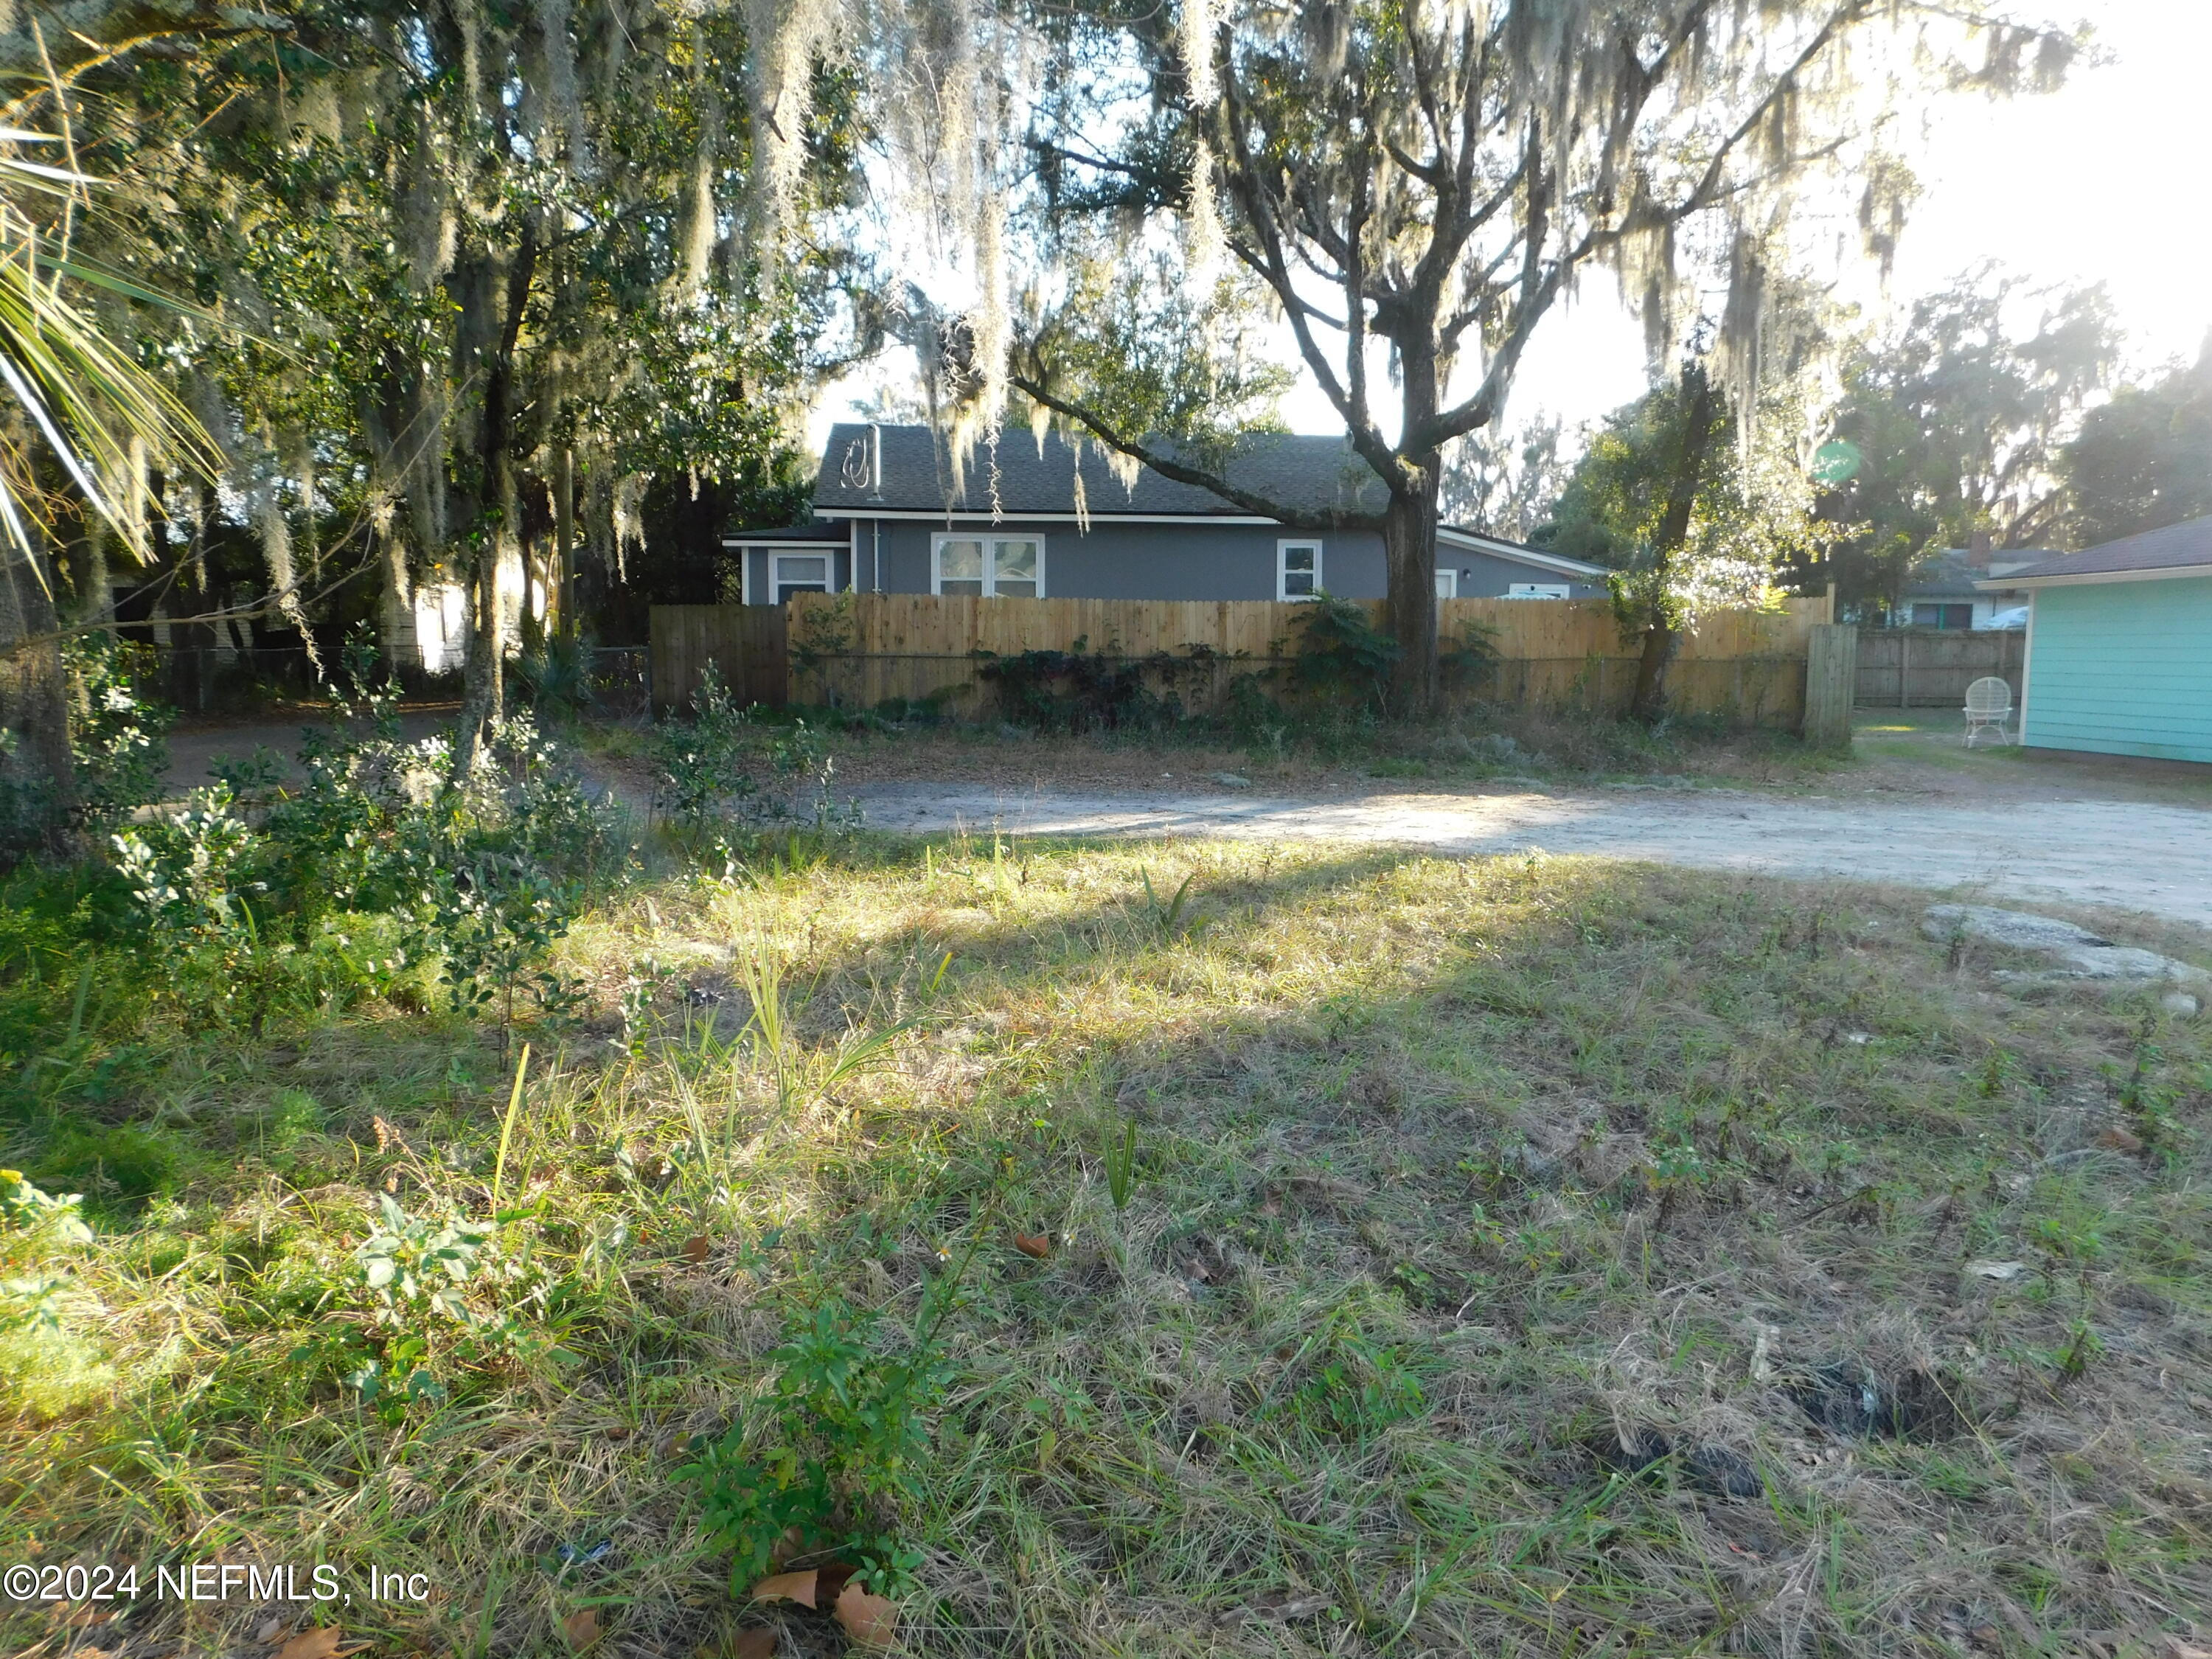 Jacksonville, FL home for sale located at 0 W 27TH Street, Jacksonville, FL 32206